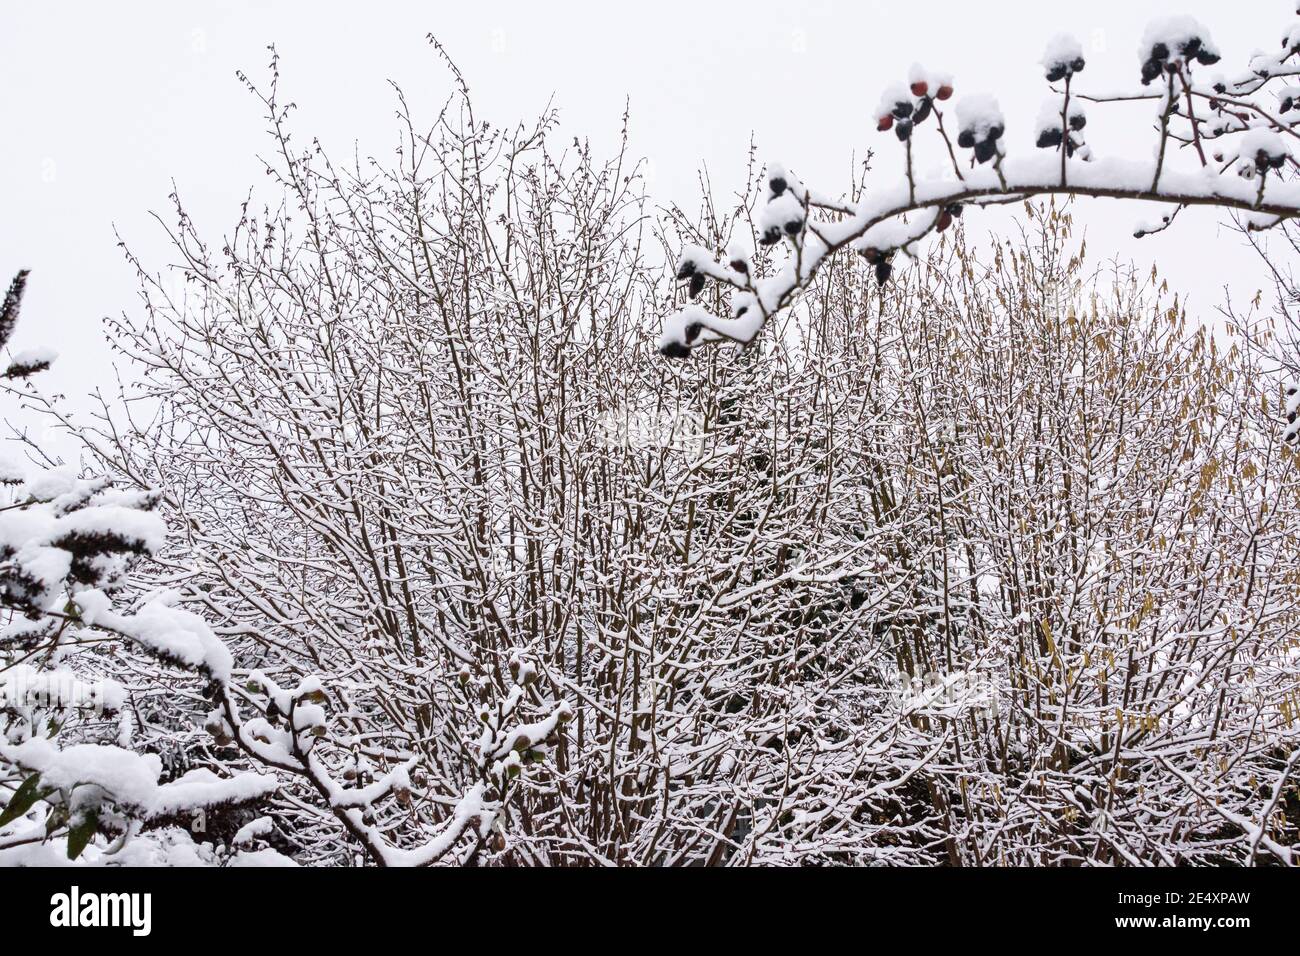 The branches of hazel trees (Corylus avellana), a Buddleja and rosehips covered in snow Stock Photo